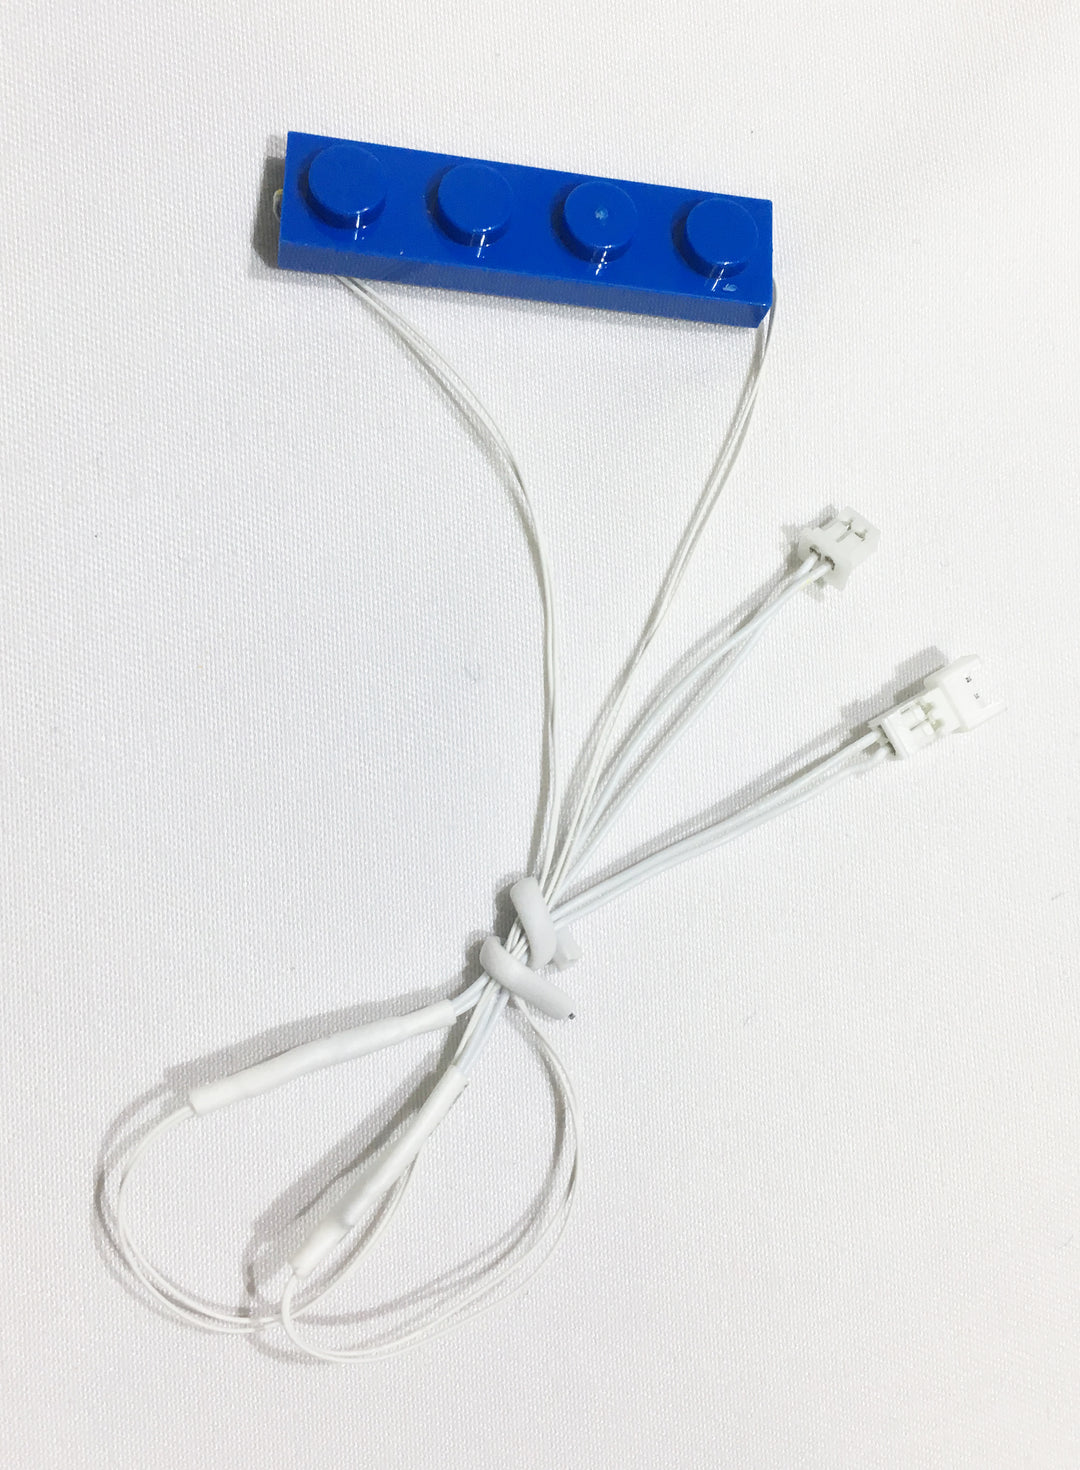 1x4-Blue-Solid-Plate-LED-LIGHT-LINX-Create-Your-Own-LED-String-works-with-LEGO-bricks-by-Brick-Loot